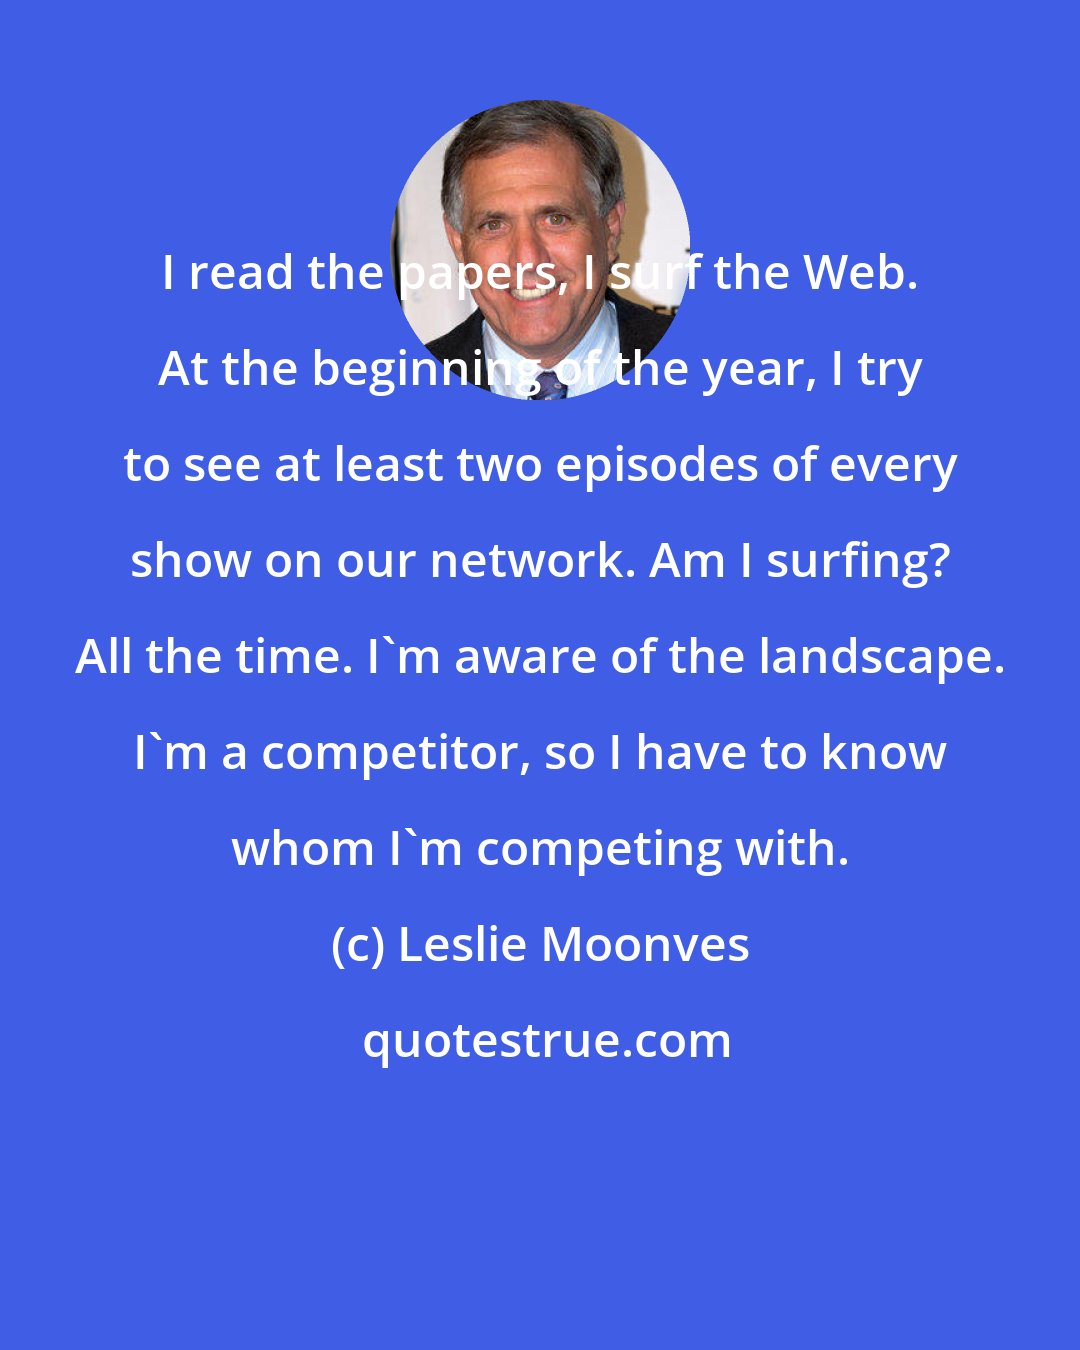 Leslie Moonves: I read the papers, I surf the Web. At the beginning of the year, I try to see at least two episodes of every show on our network. Am I surfing? All the time. I'm aware of the landscape. I'm a competitor, so I have to know whom I'm competing with.